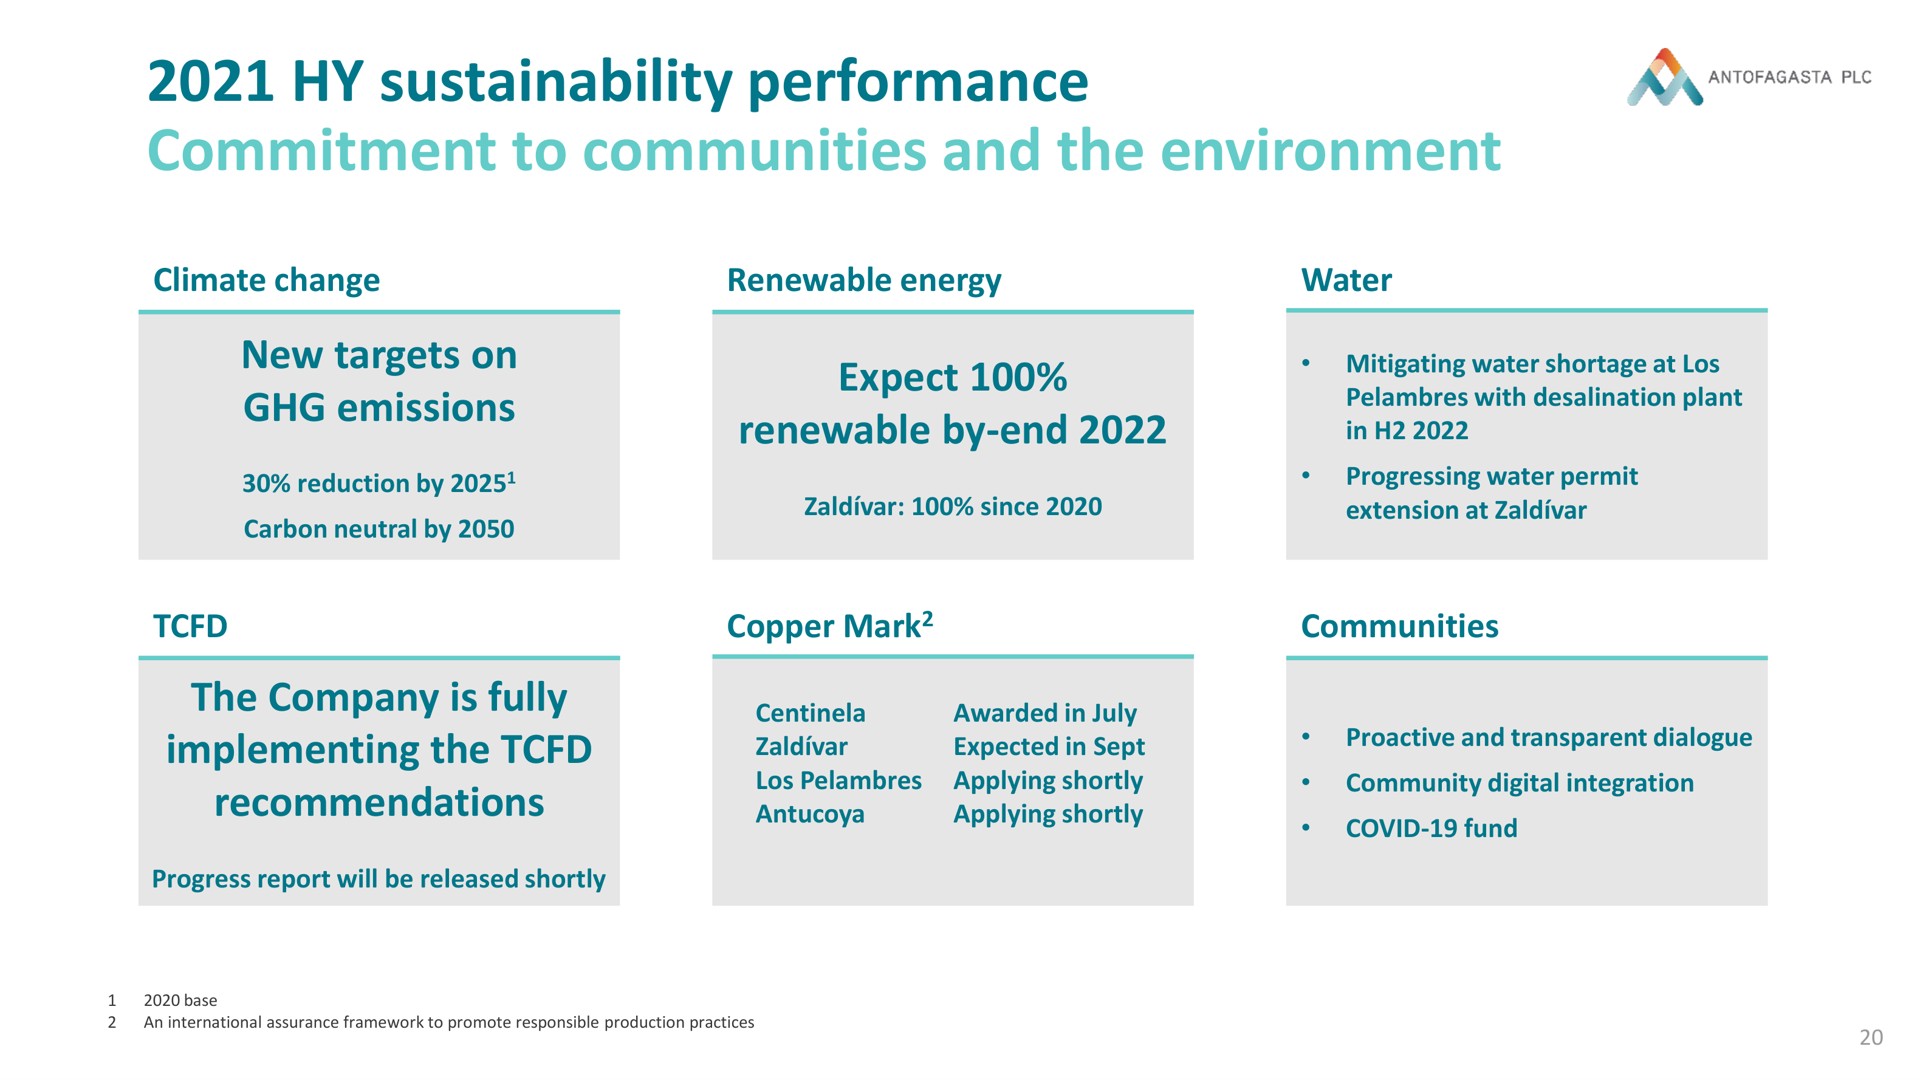 performance commitment to communities and the environment | Antofagasta